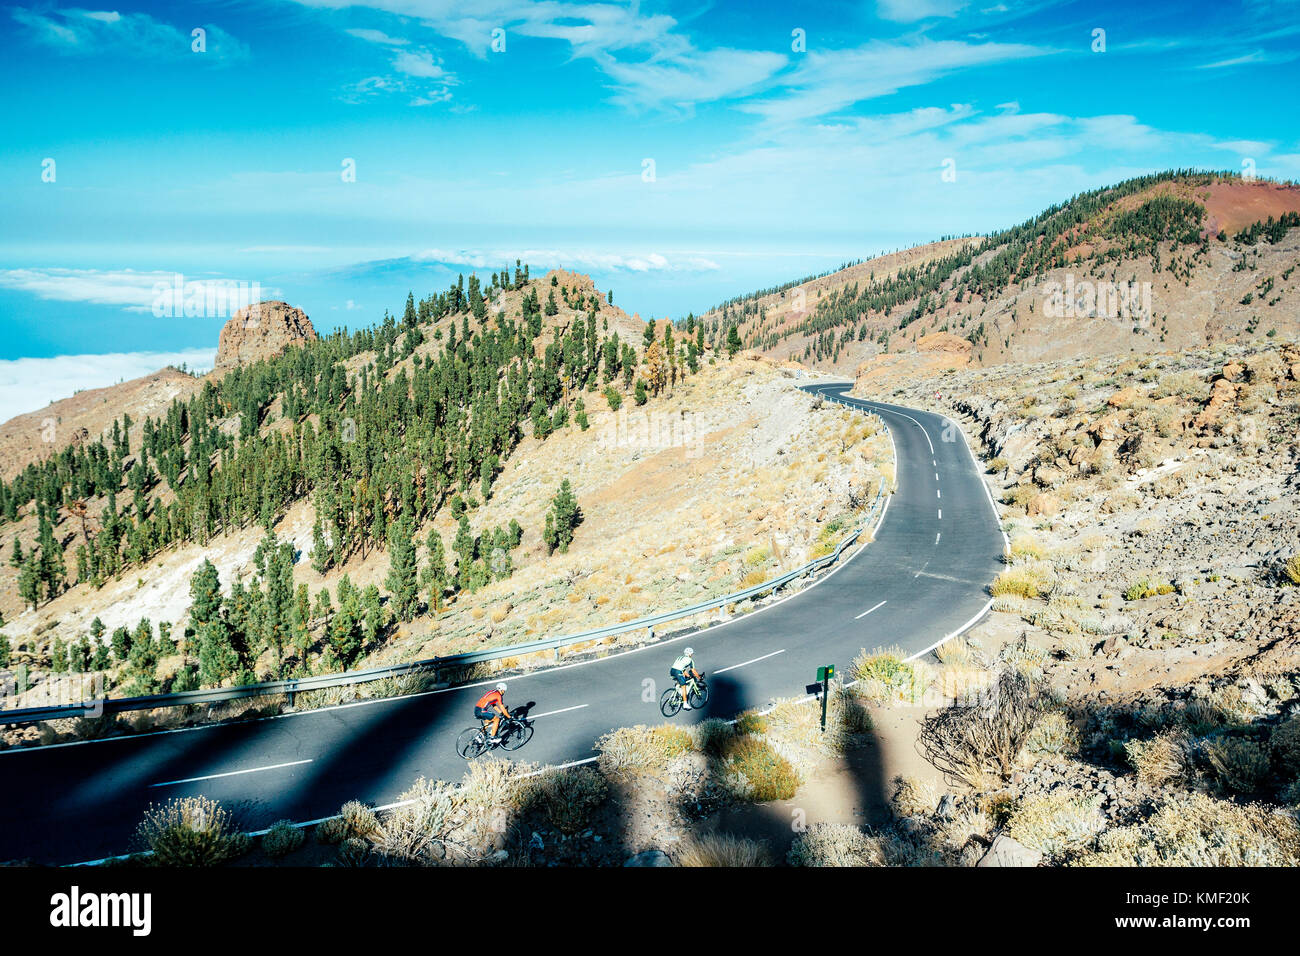 Two cyclists pedaling on mountain road,Teide National Park,Tenerife,Canary Islands,Spain Stock Photo